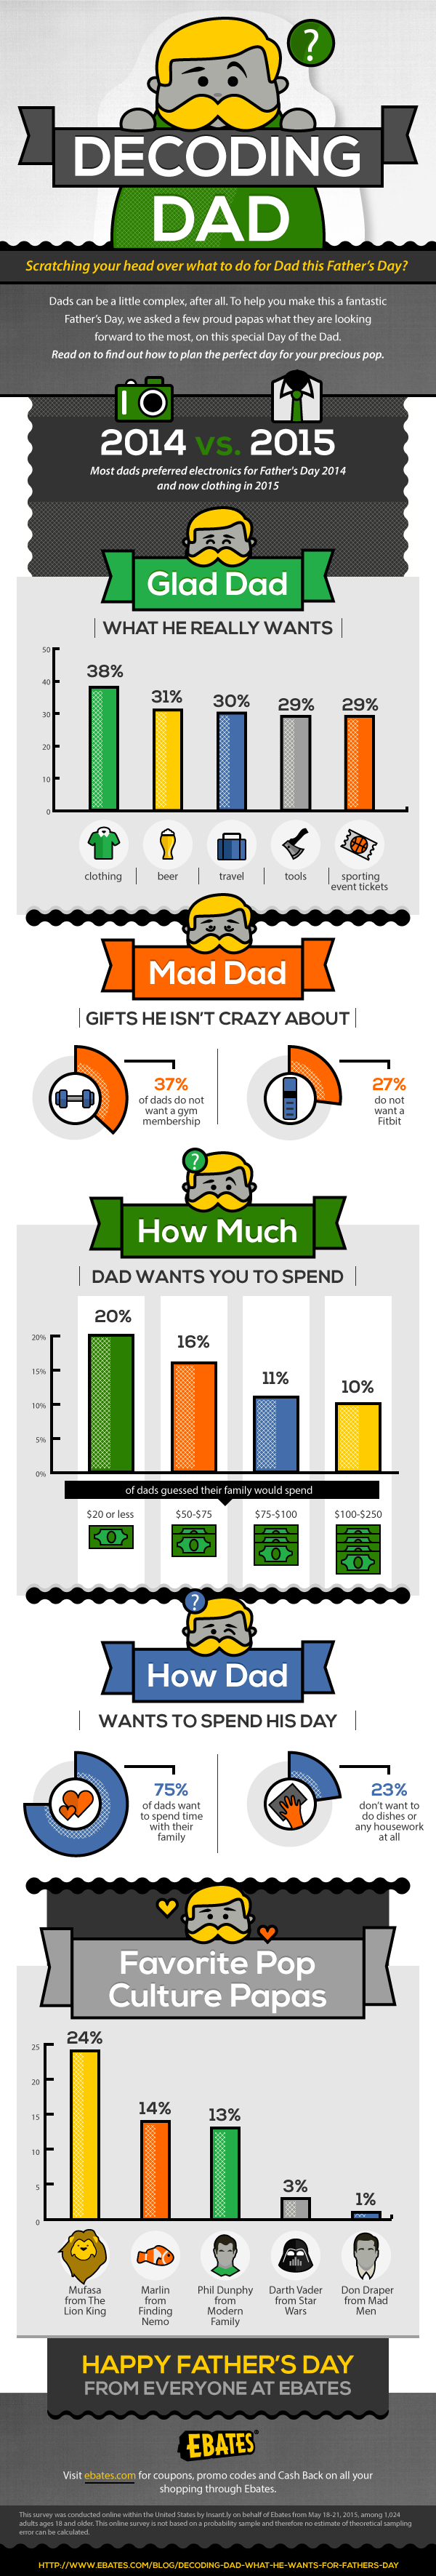 Ebates Father's Day infographic